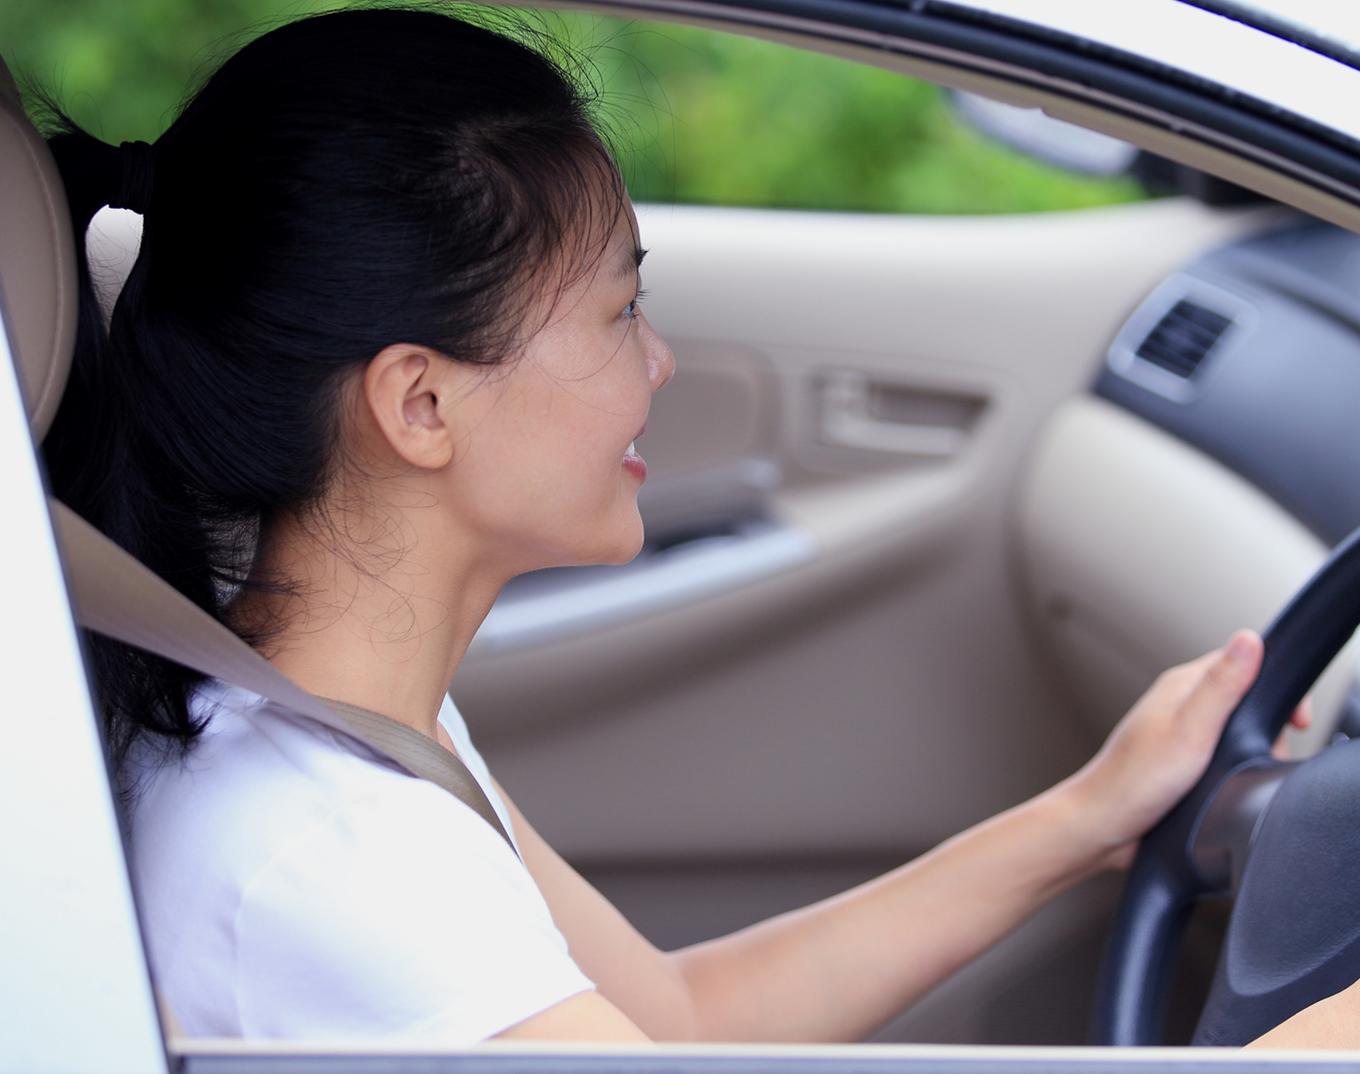 Reduce Anxiety Over Driving using Visualization